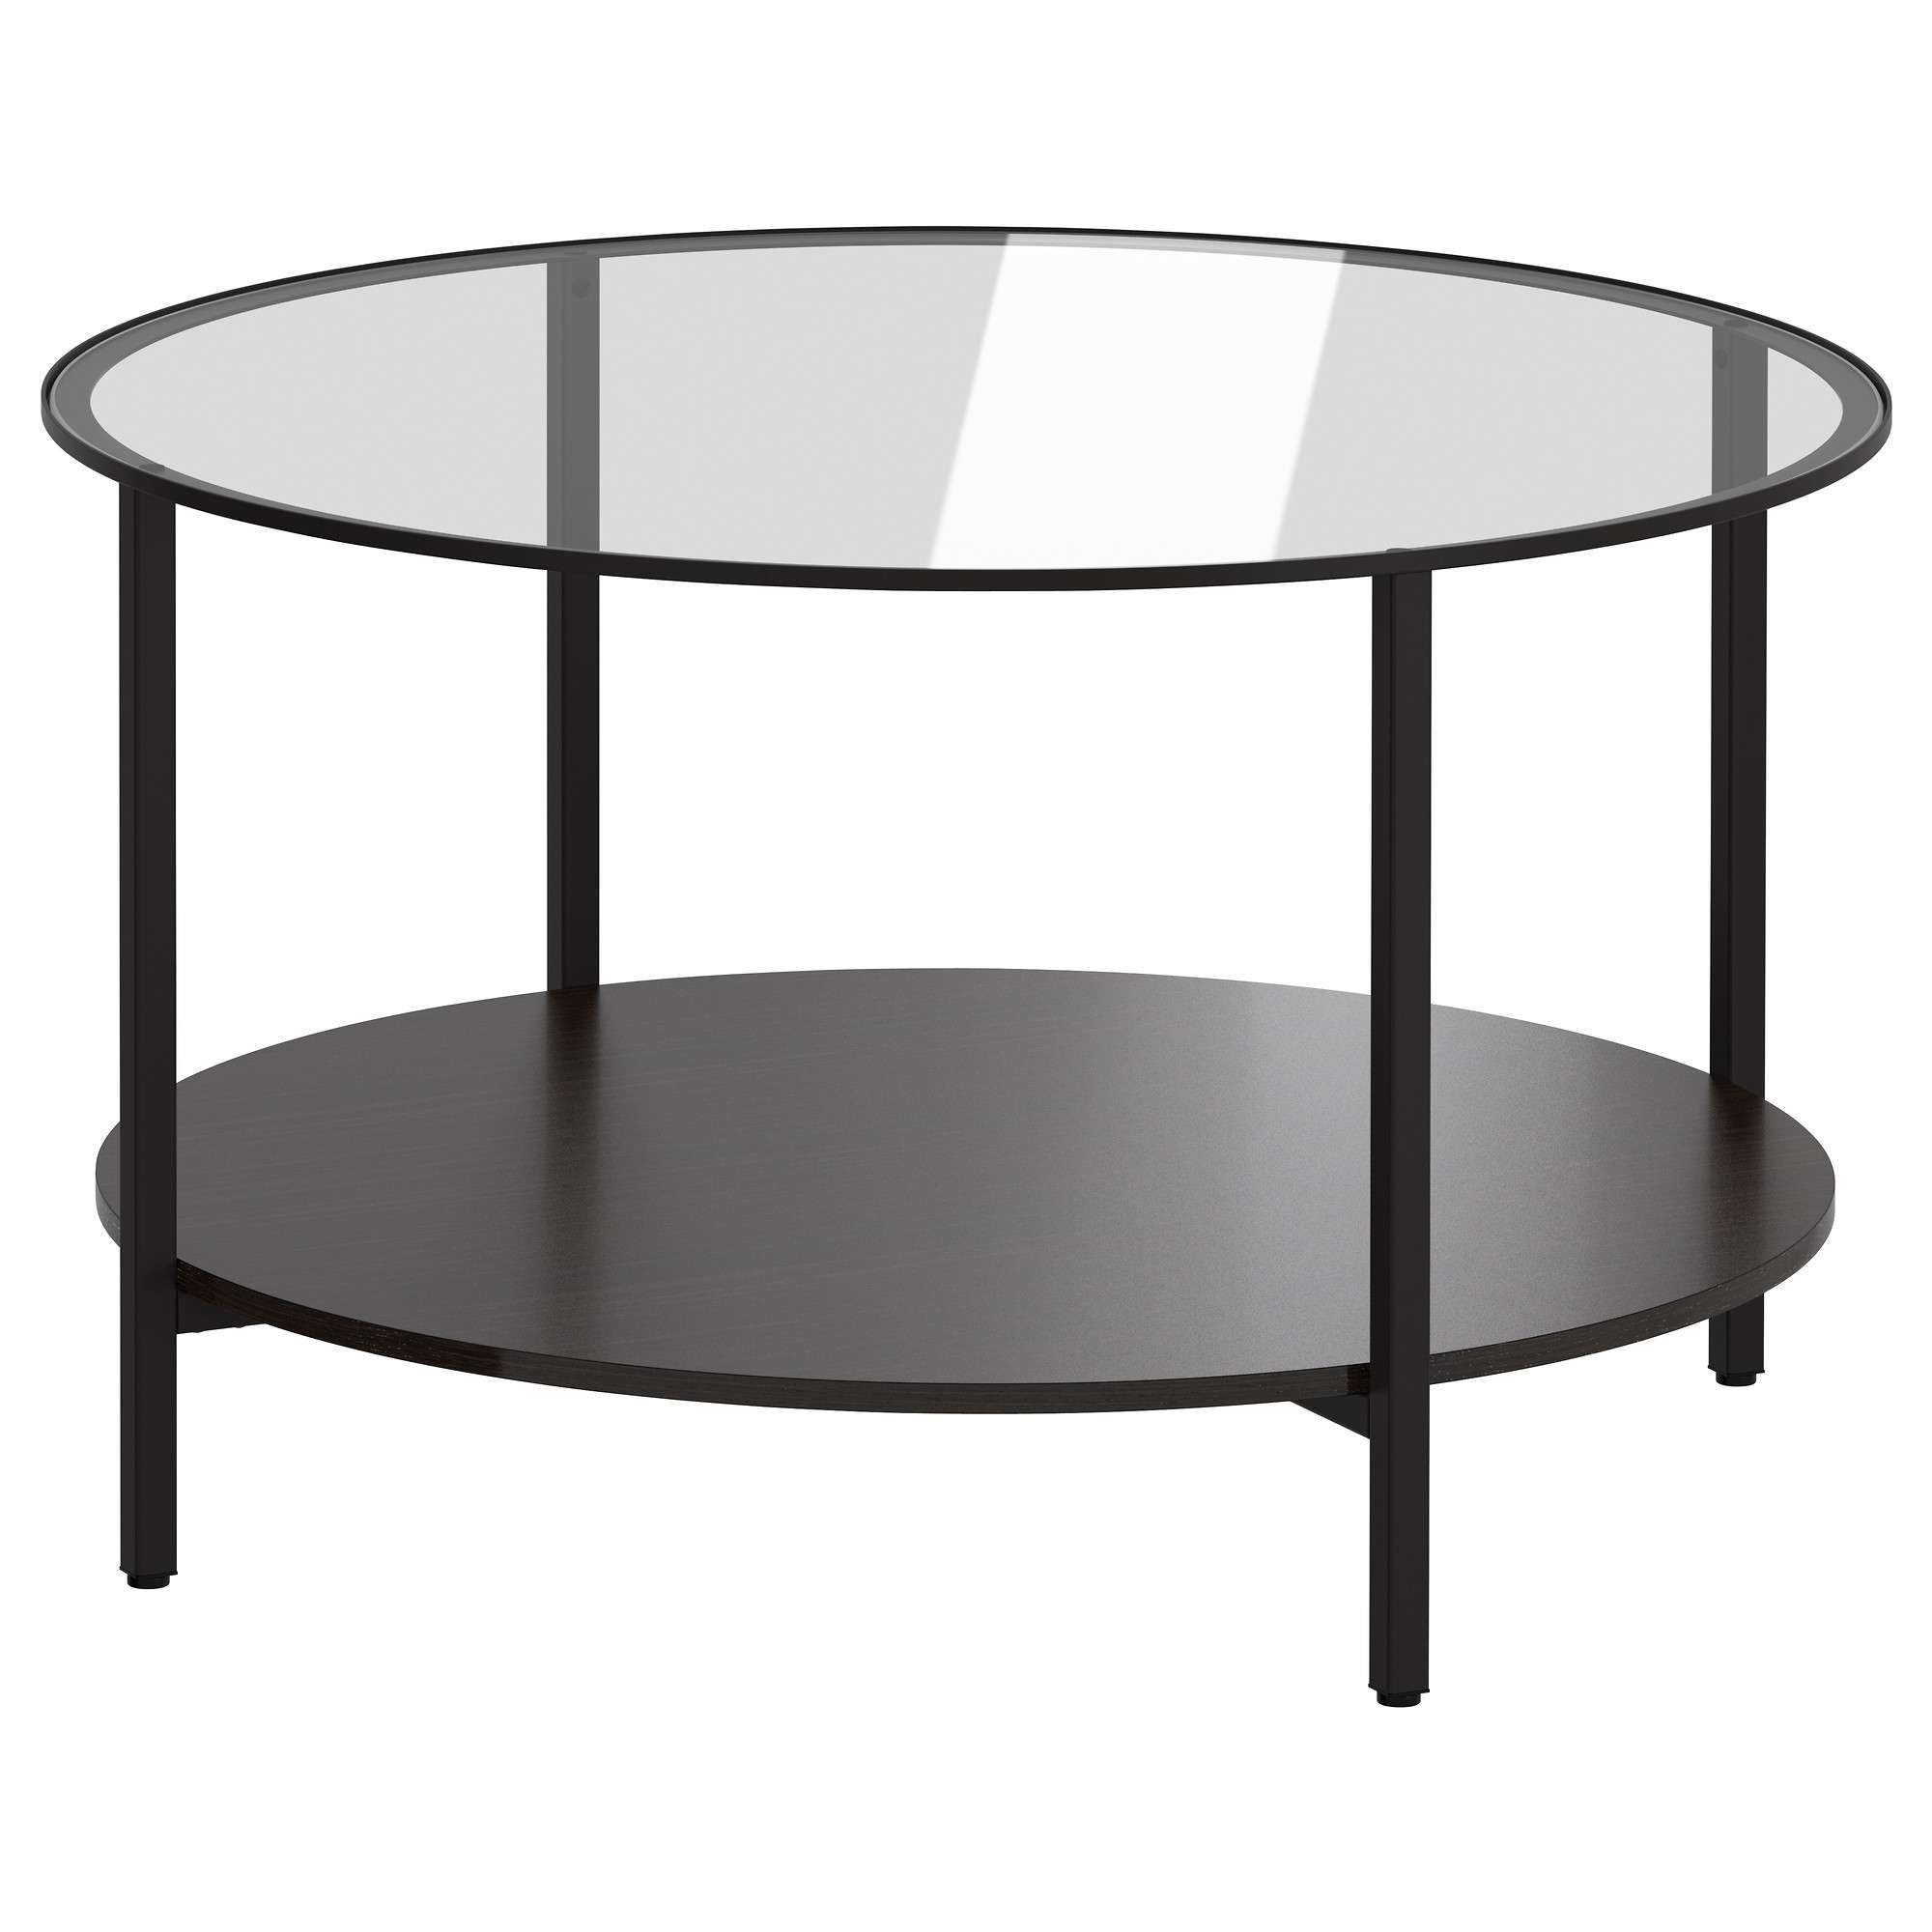 Best And Newest Black Glass Coffee Tables Within Vittsjö Coffee Table – Black Brown/glass – Ikea (View 12 of 20)